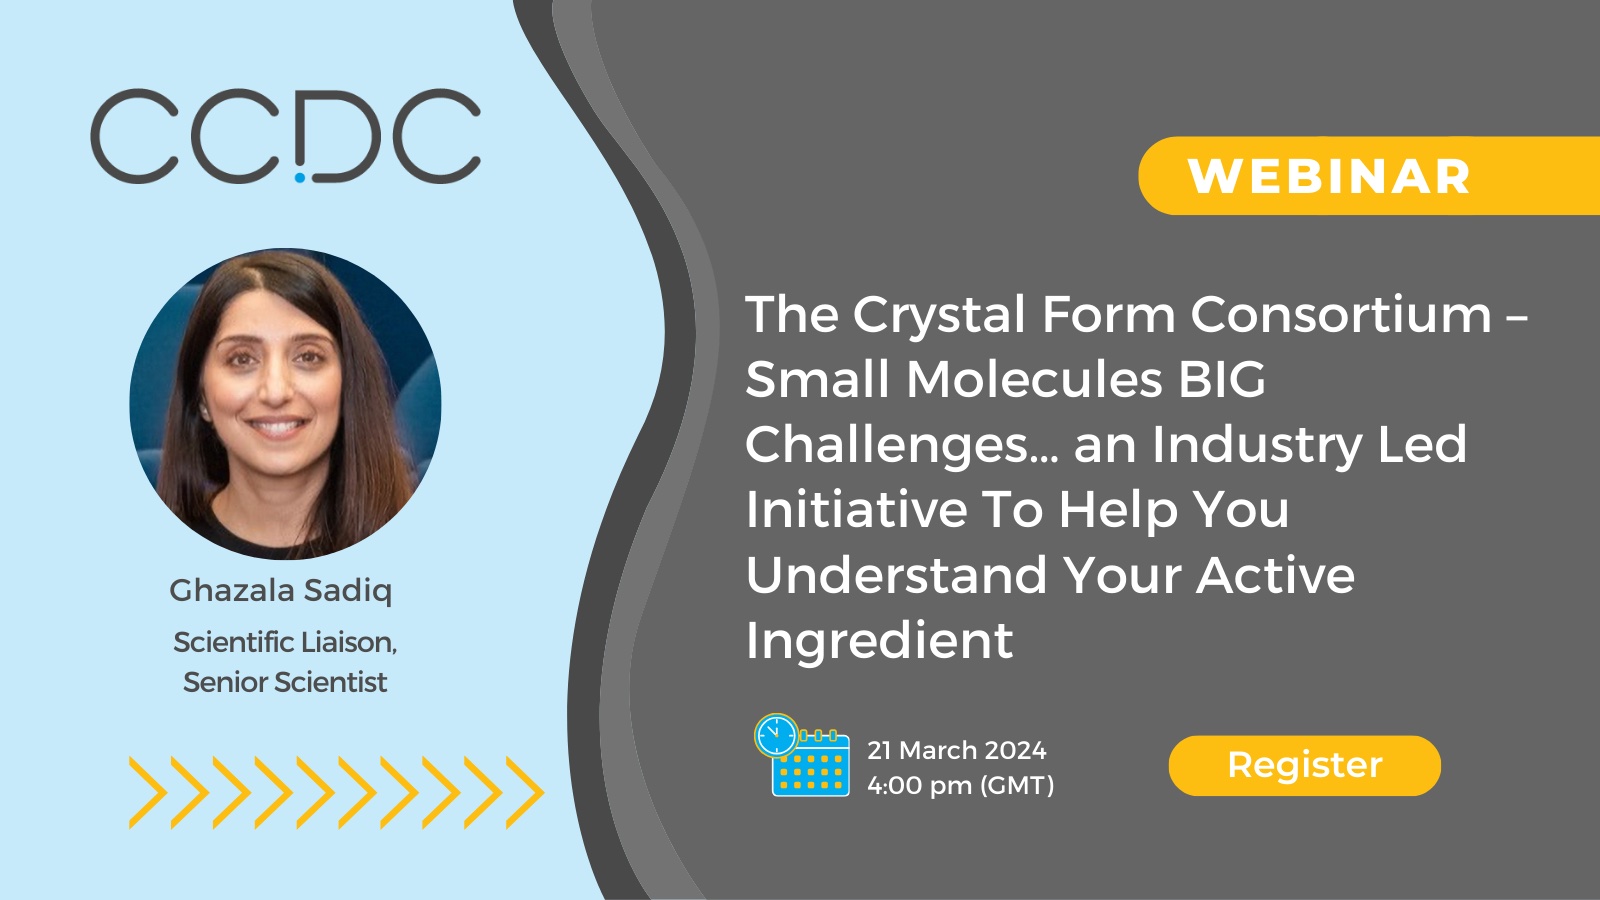 The Crystal Form Consortium – Small Molecules BIG Challenges… an Industry Led Initiative To Help You Understand Your Active Ingredient